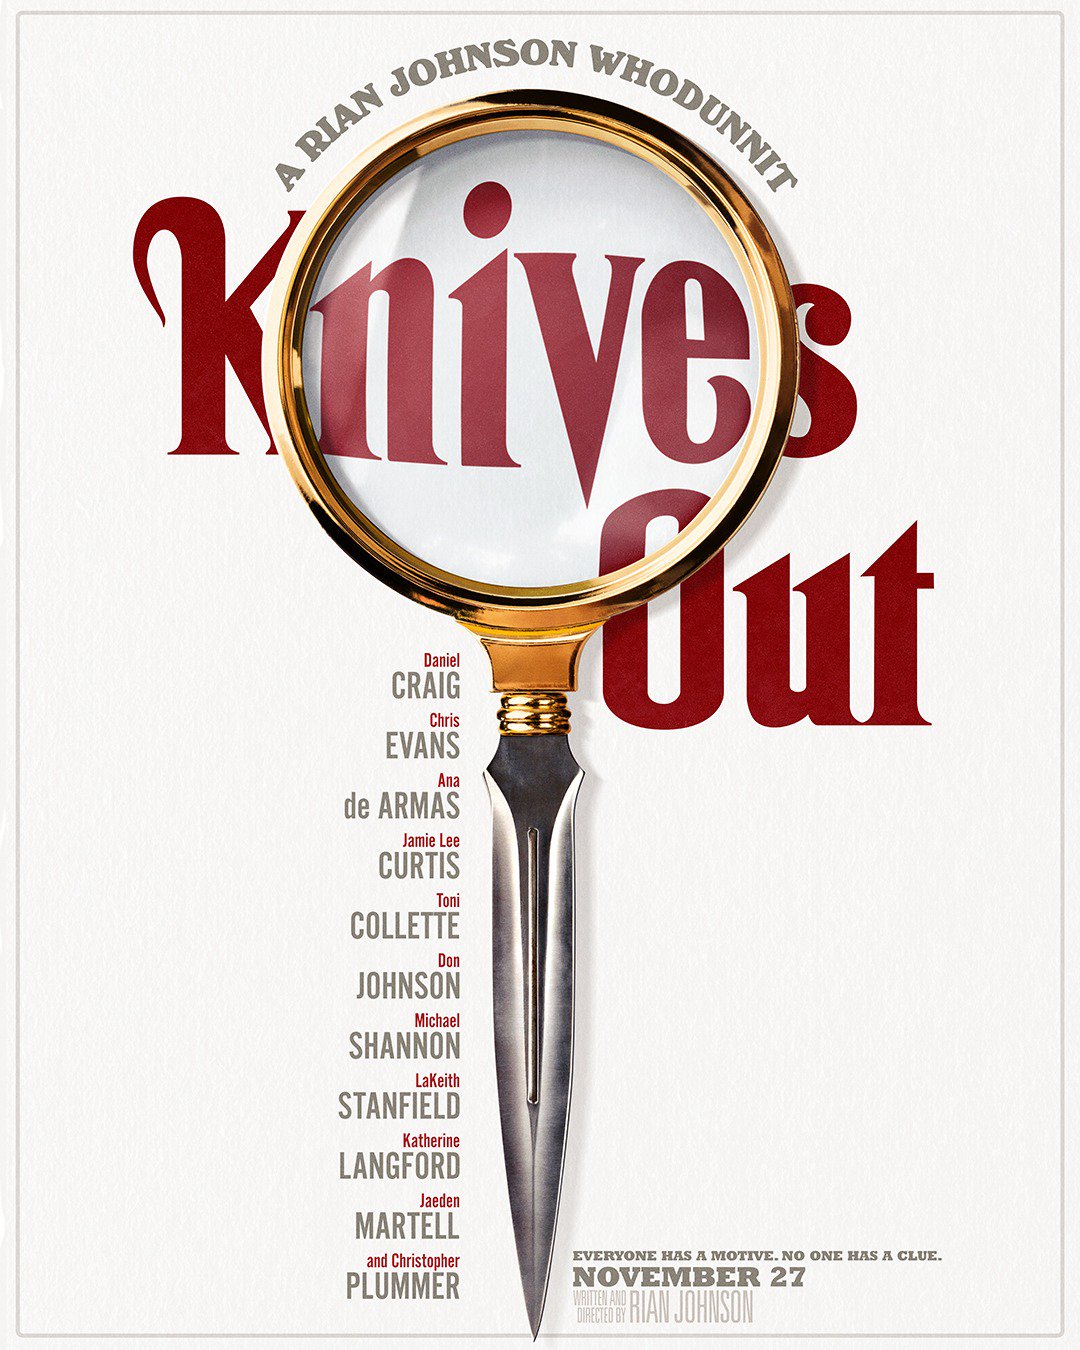 D erl3jU4AAuWq8?format=jpg&name=large Chris Evans Steals the Spotlight in Trailer for Rian Johnson's Knives Out